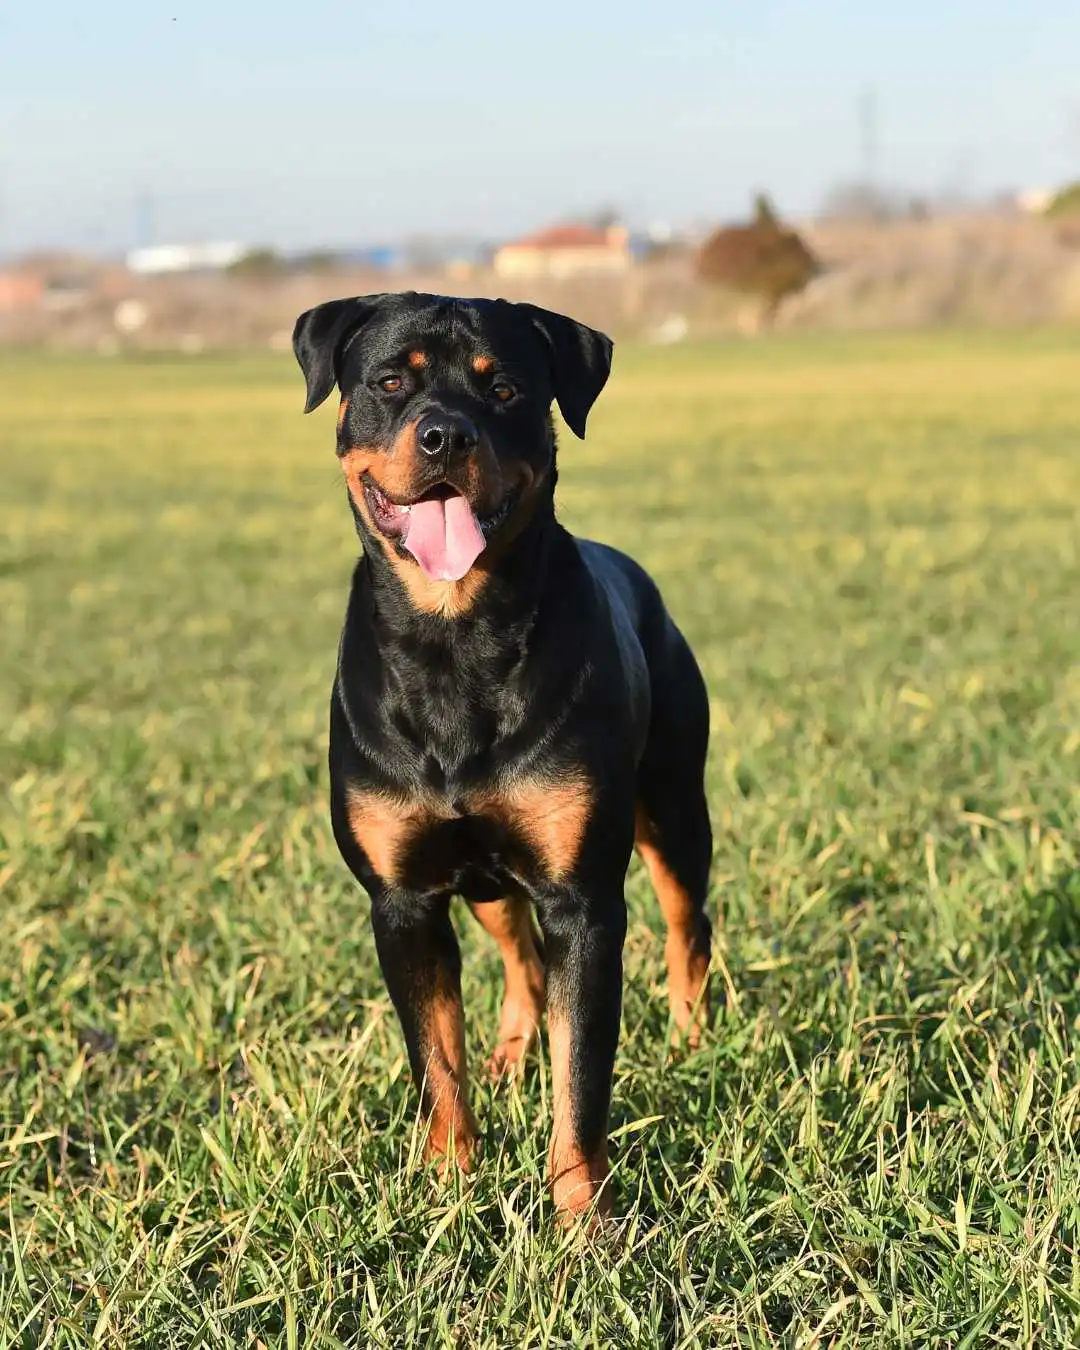 Rottweiler service dog standing in the field